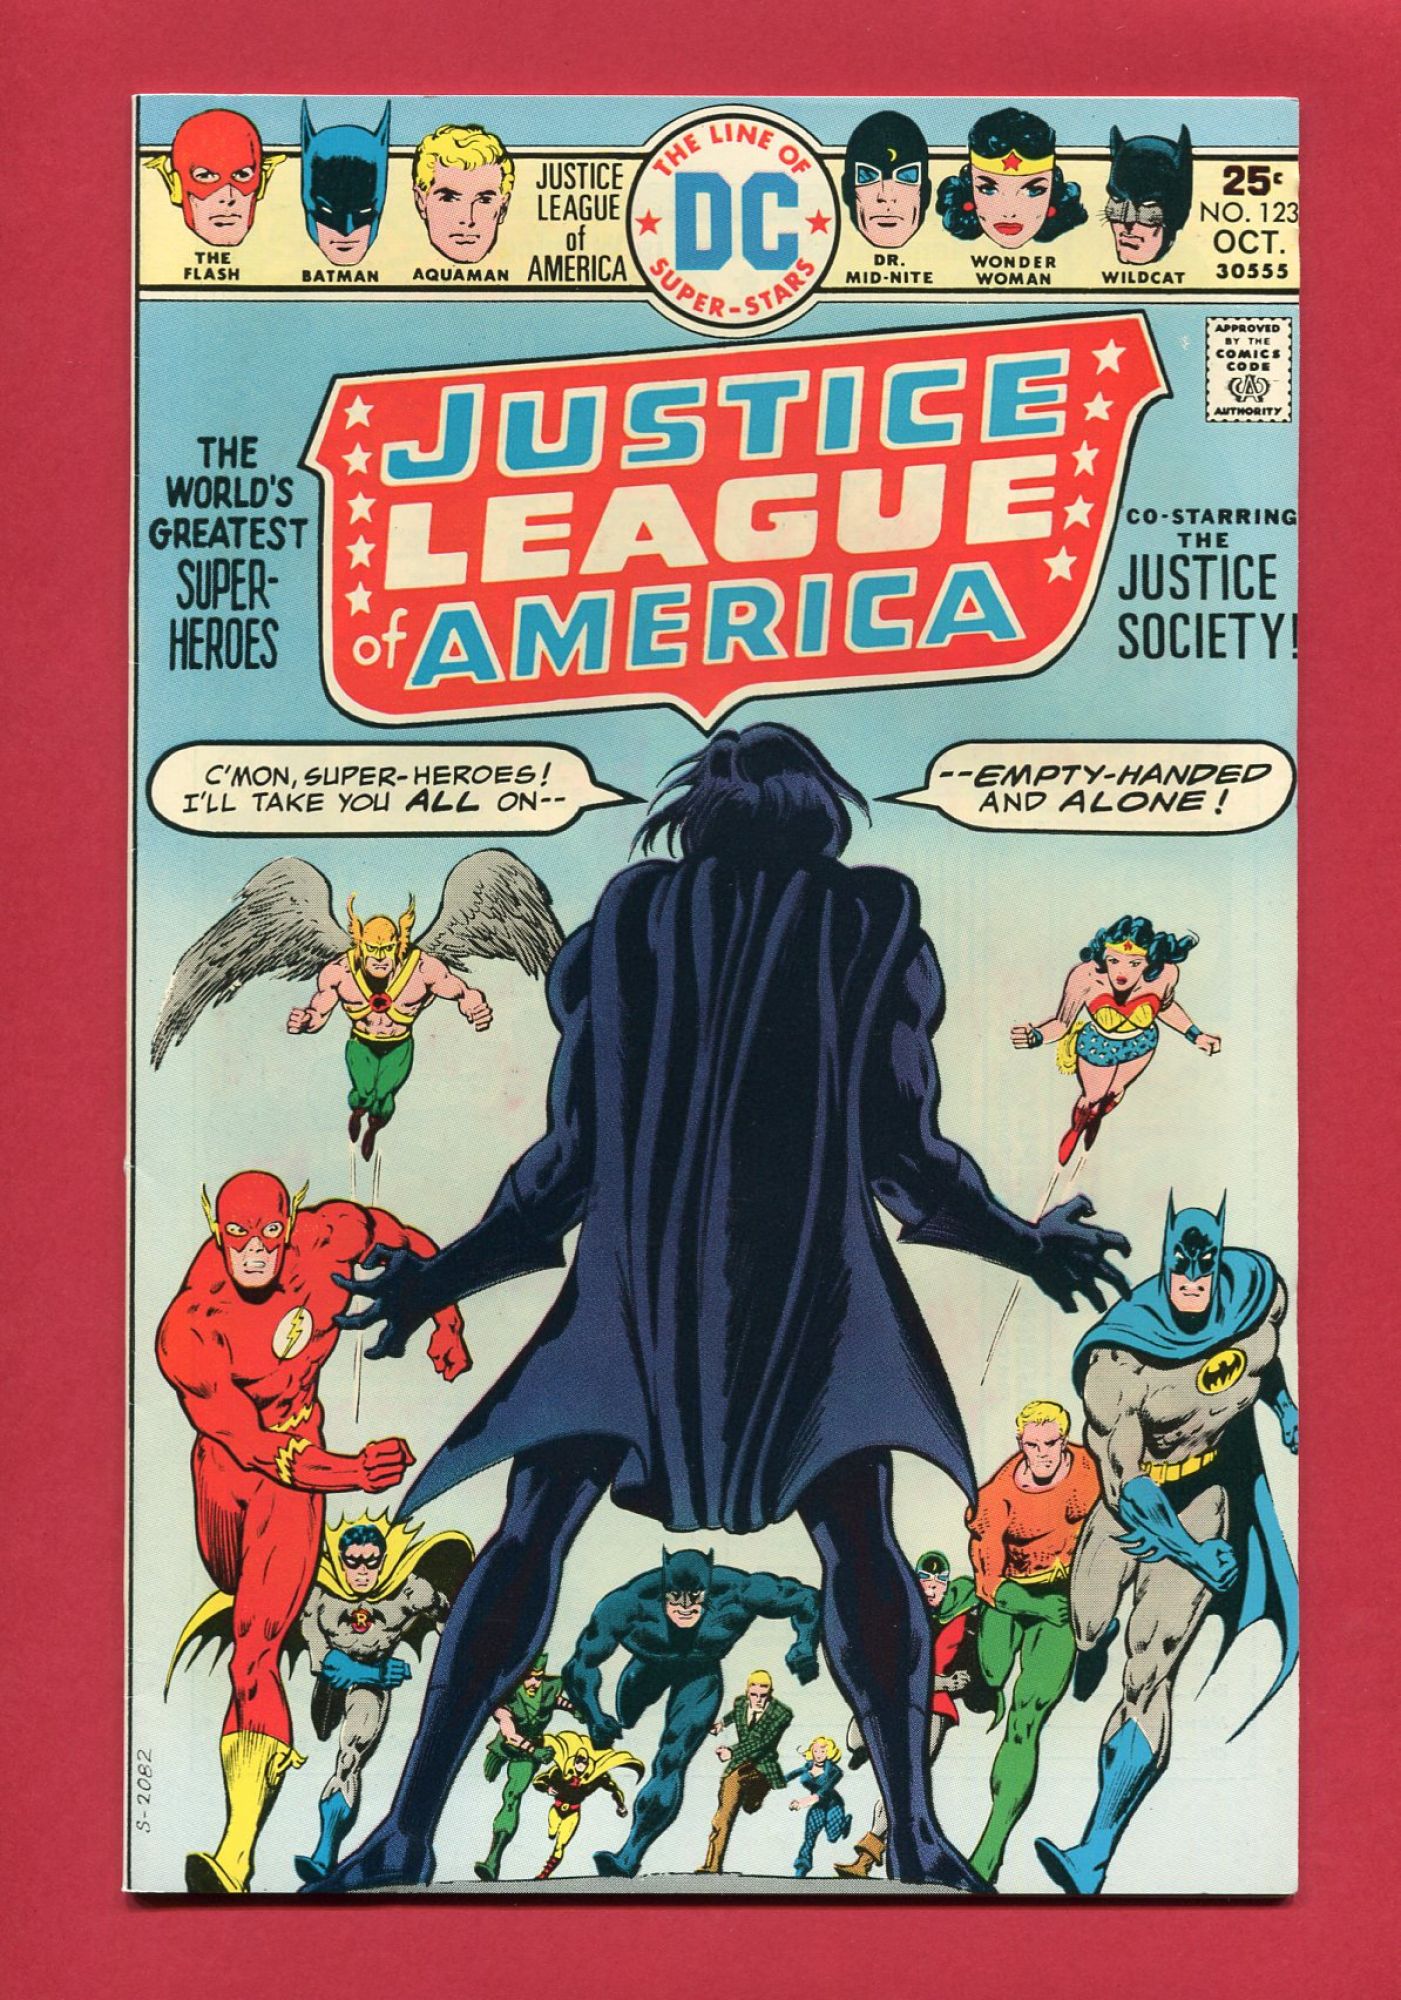 Justice League of America #123, Oct 1975, 8.0 VF